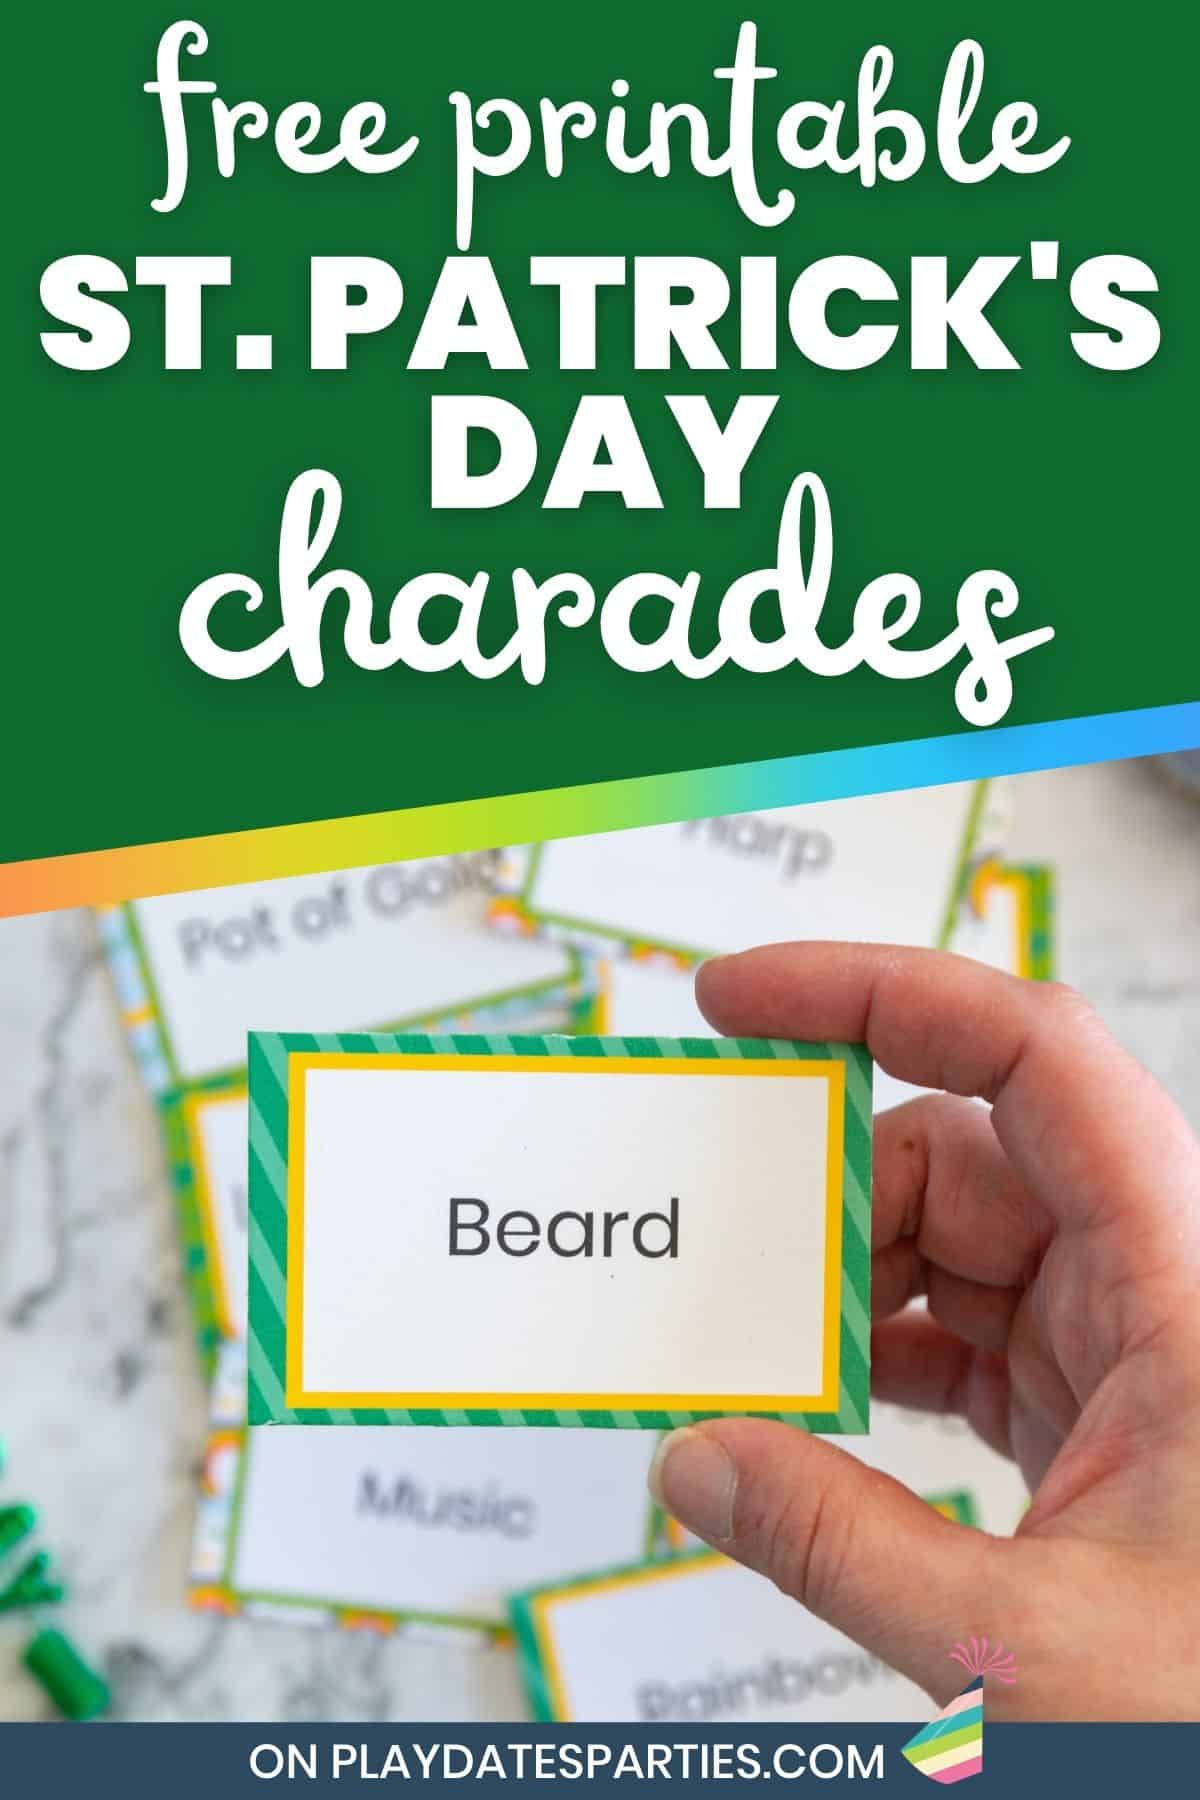 A woman's hand holding a printed game card with text overlay free printable St. Patrick's Day charades.